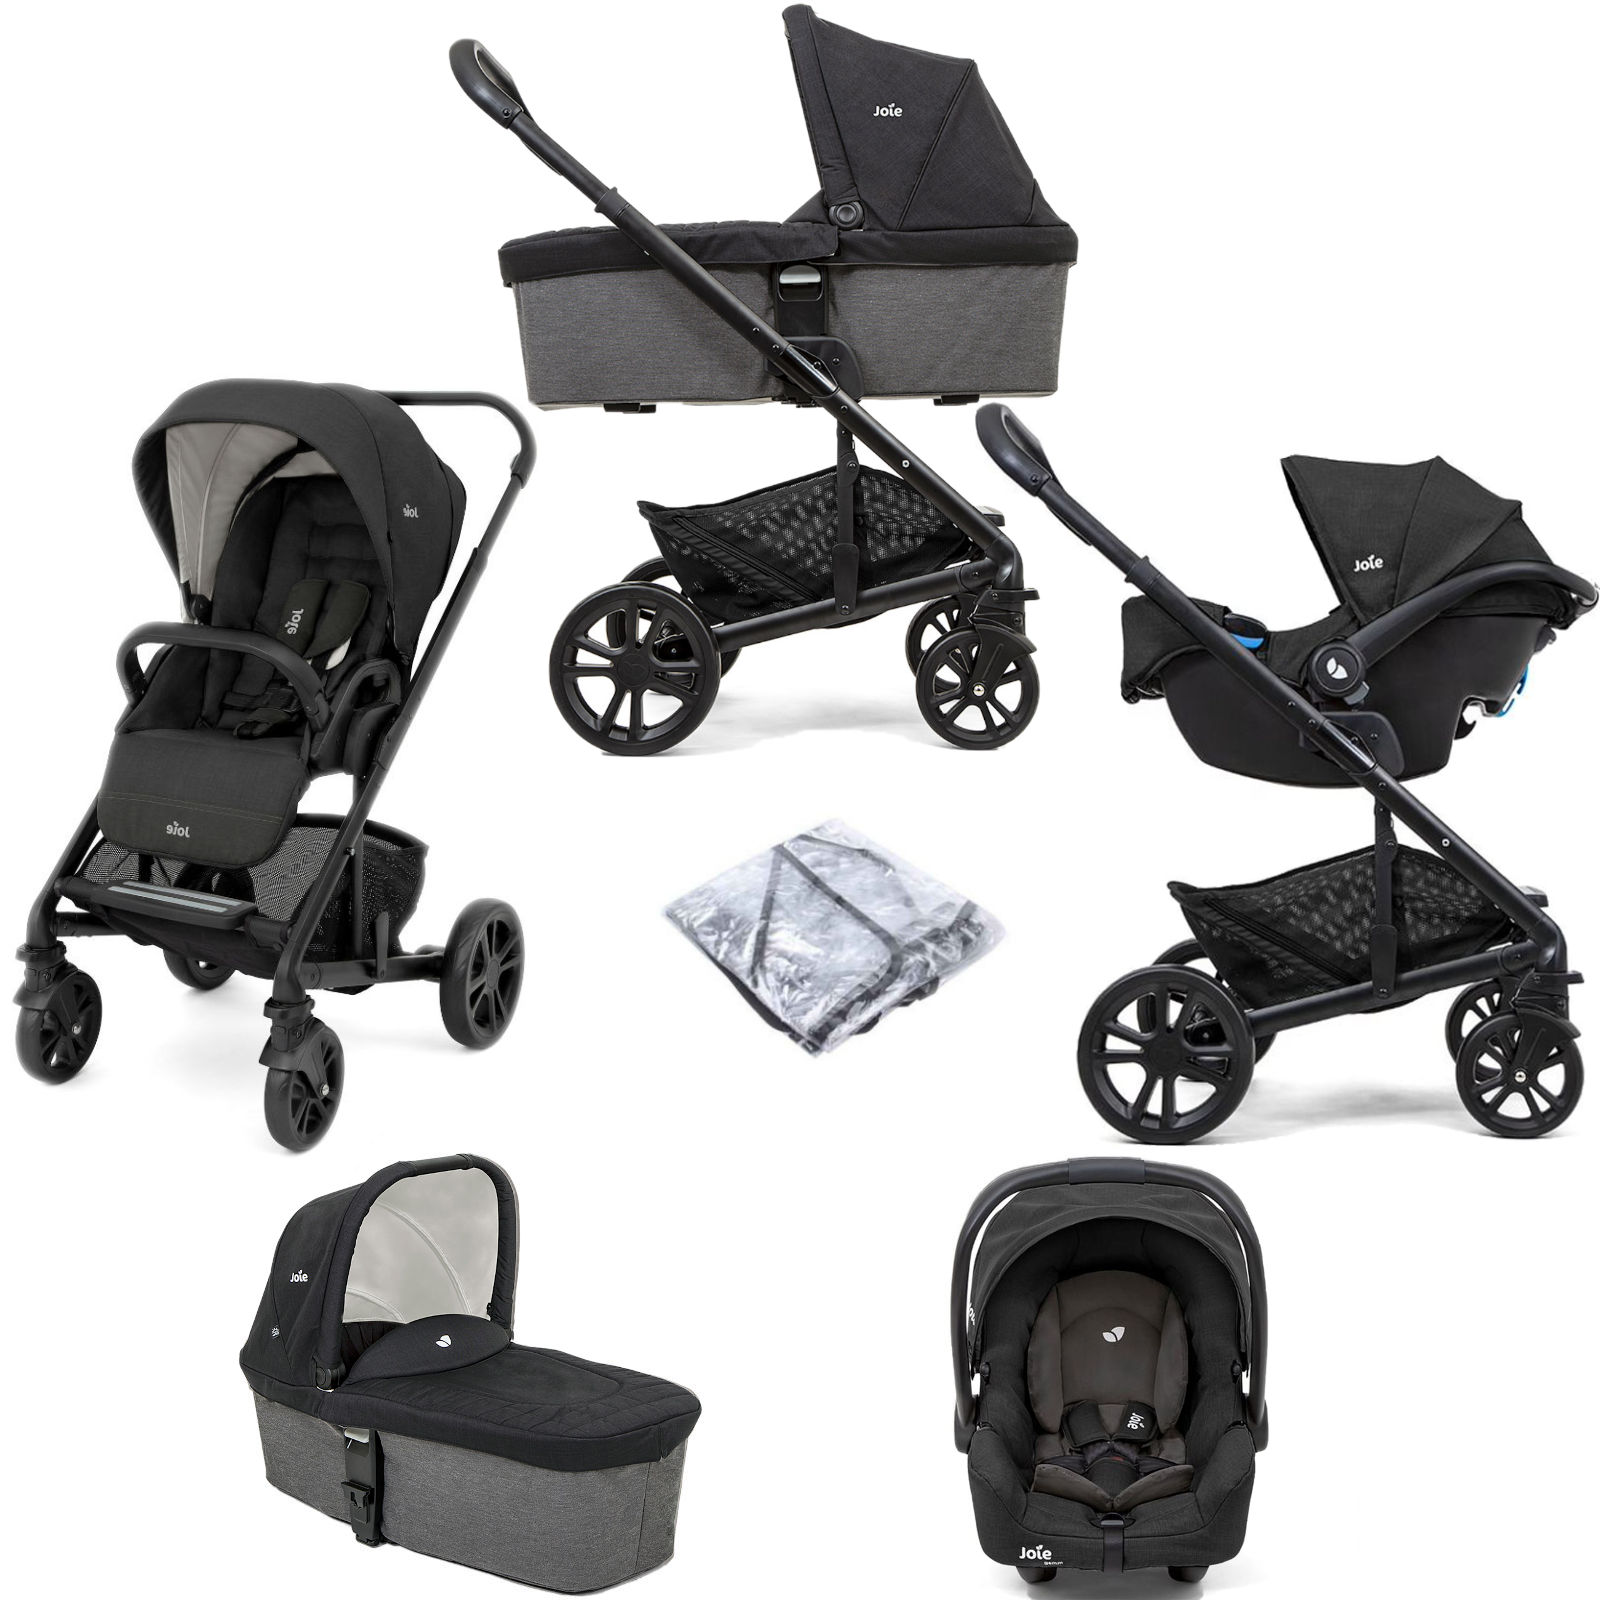 Joie Chrome (Gemm) Travel System with Carrycot - Shale